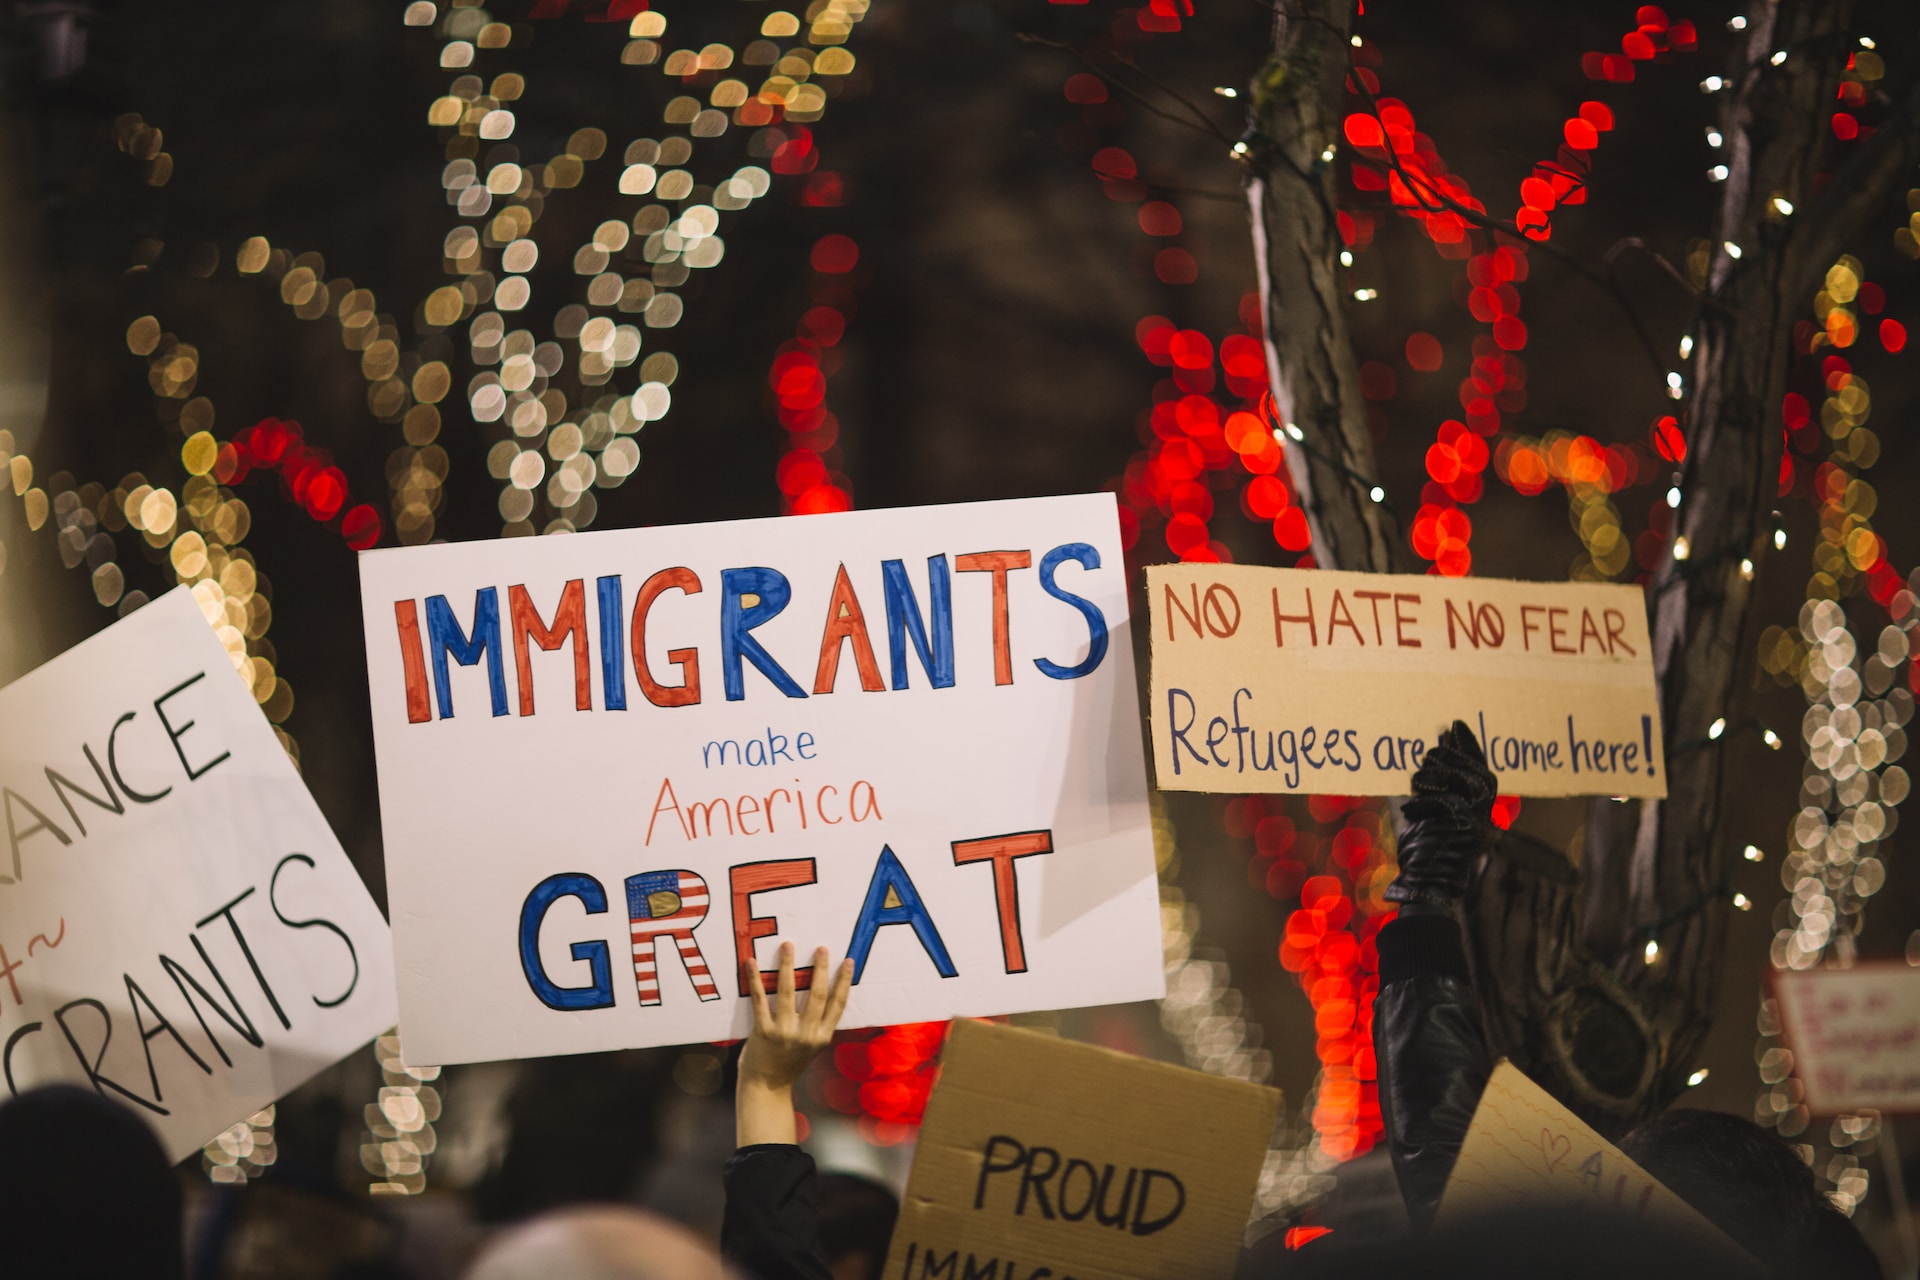 What benefits do immigrants get when they come to America?